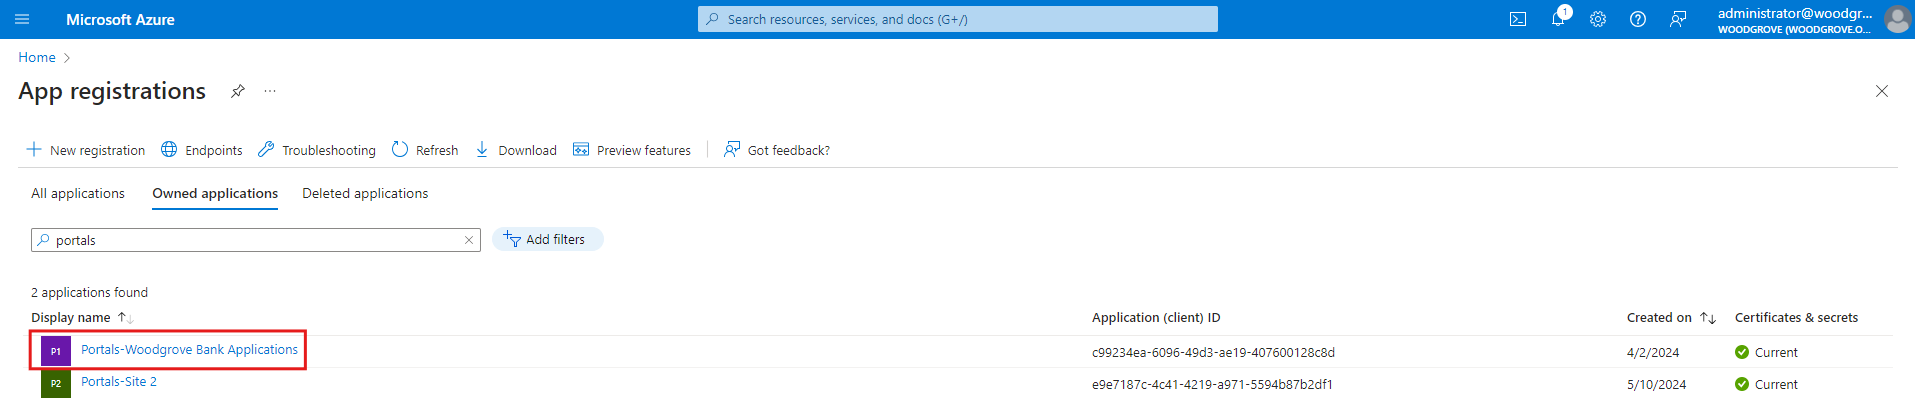 Screenshot of the app registration in Azure for a Power Pages site.